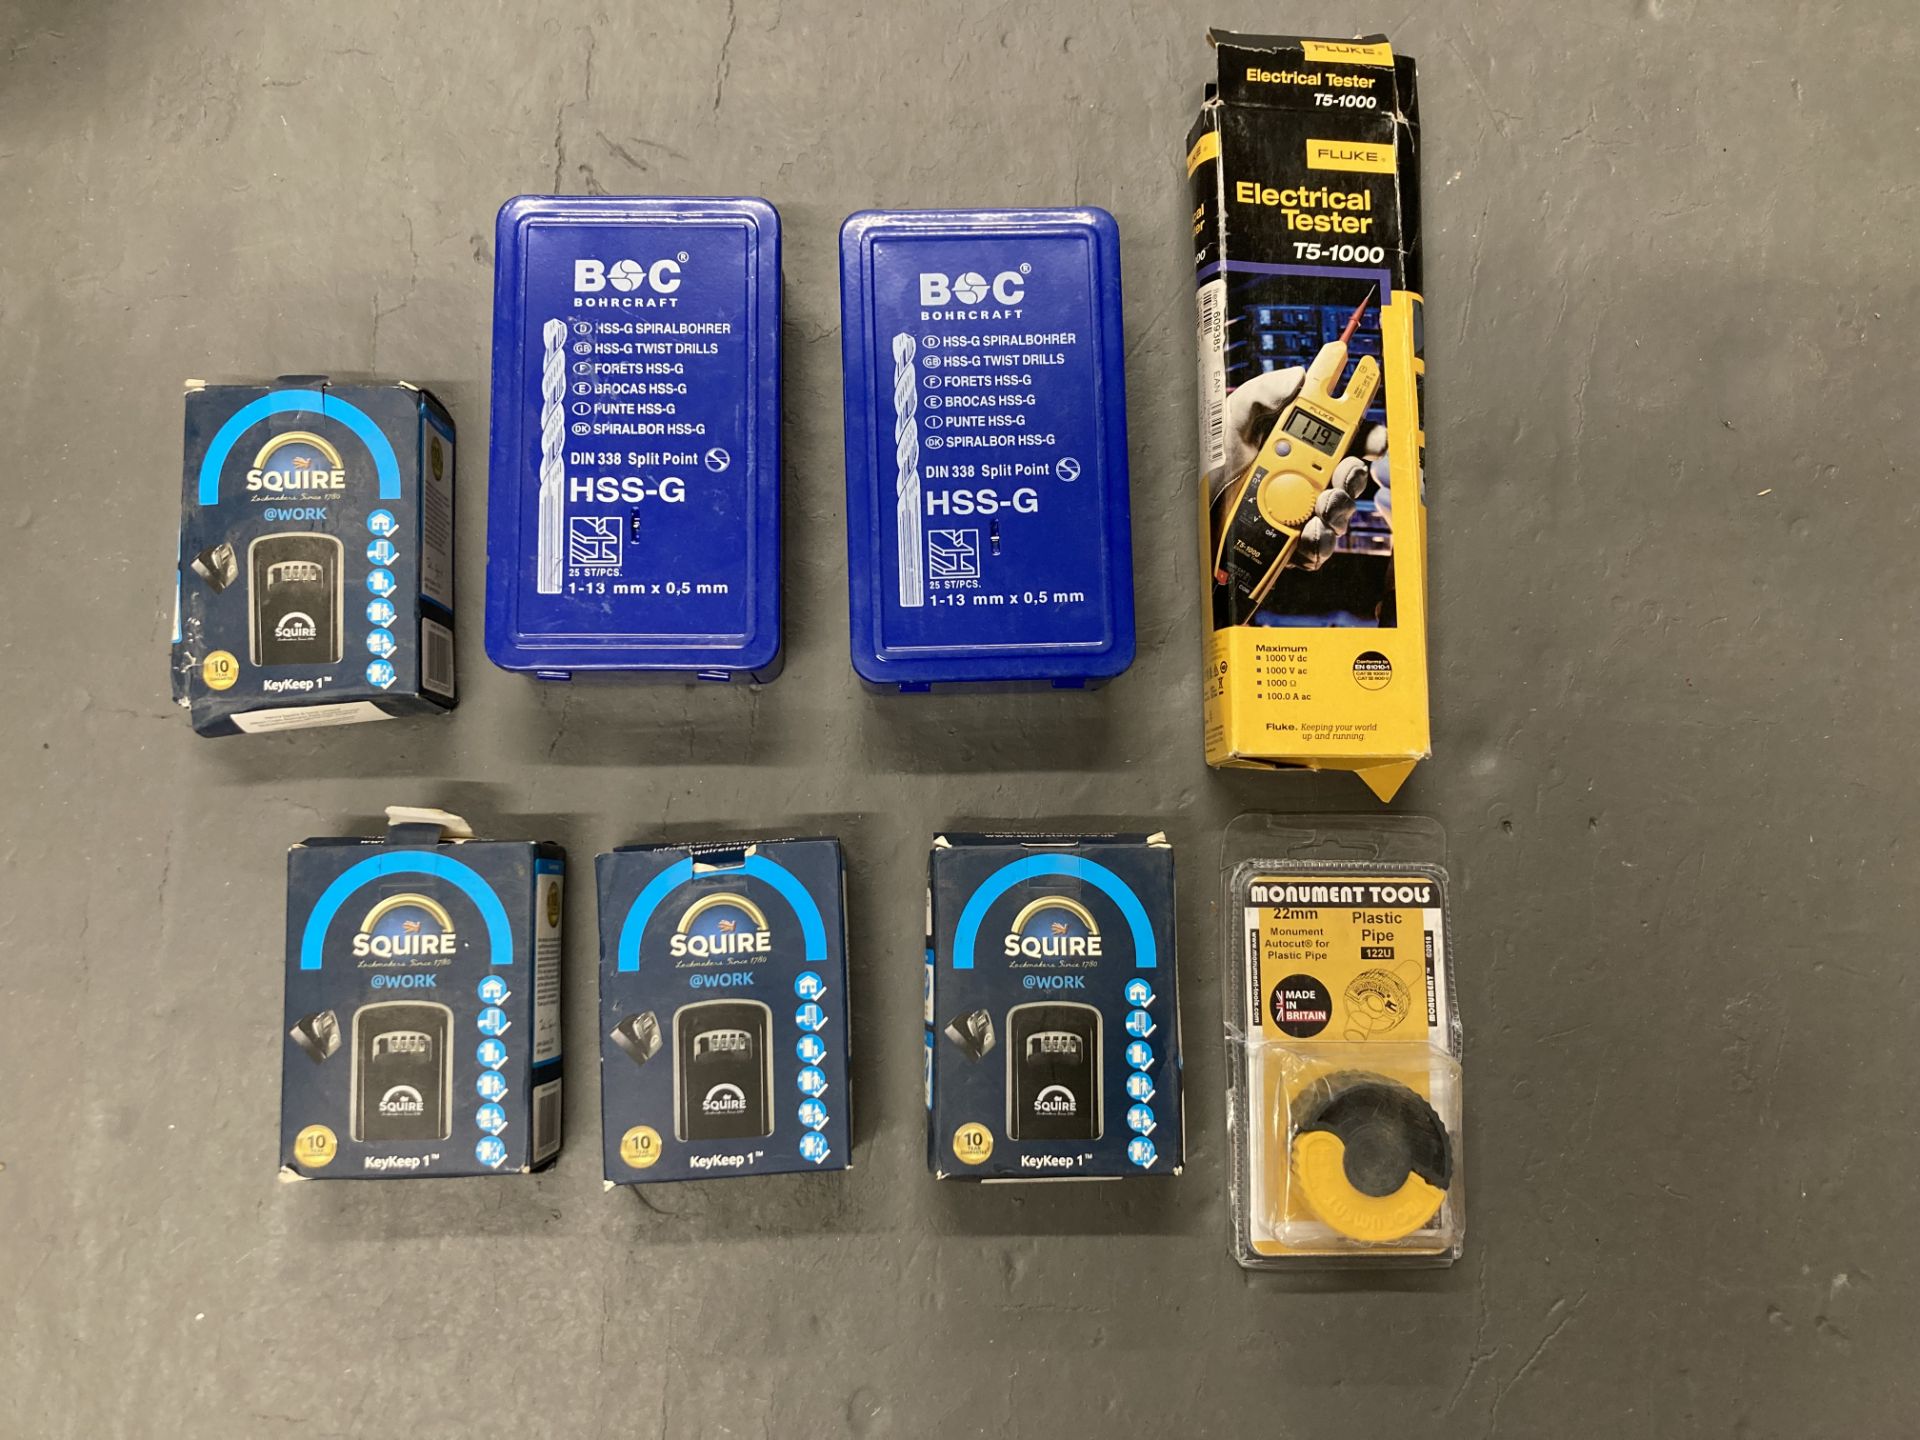 Two sets of BOC drill bits, together with a Fluke electrical tester,